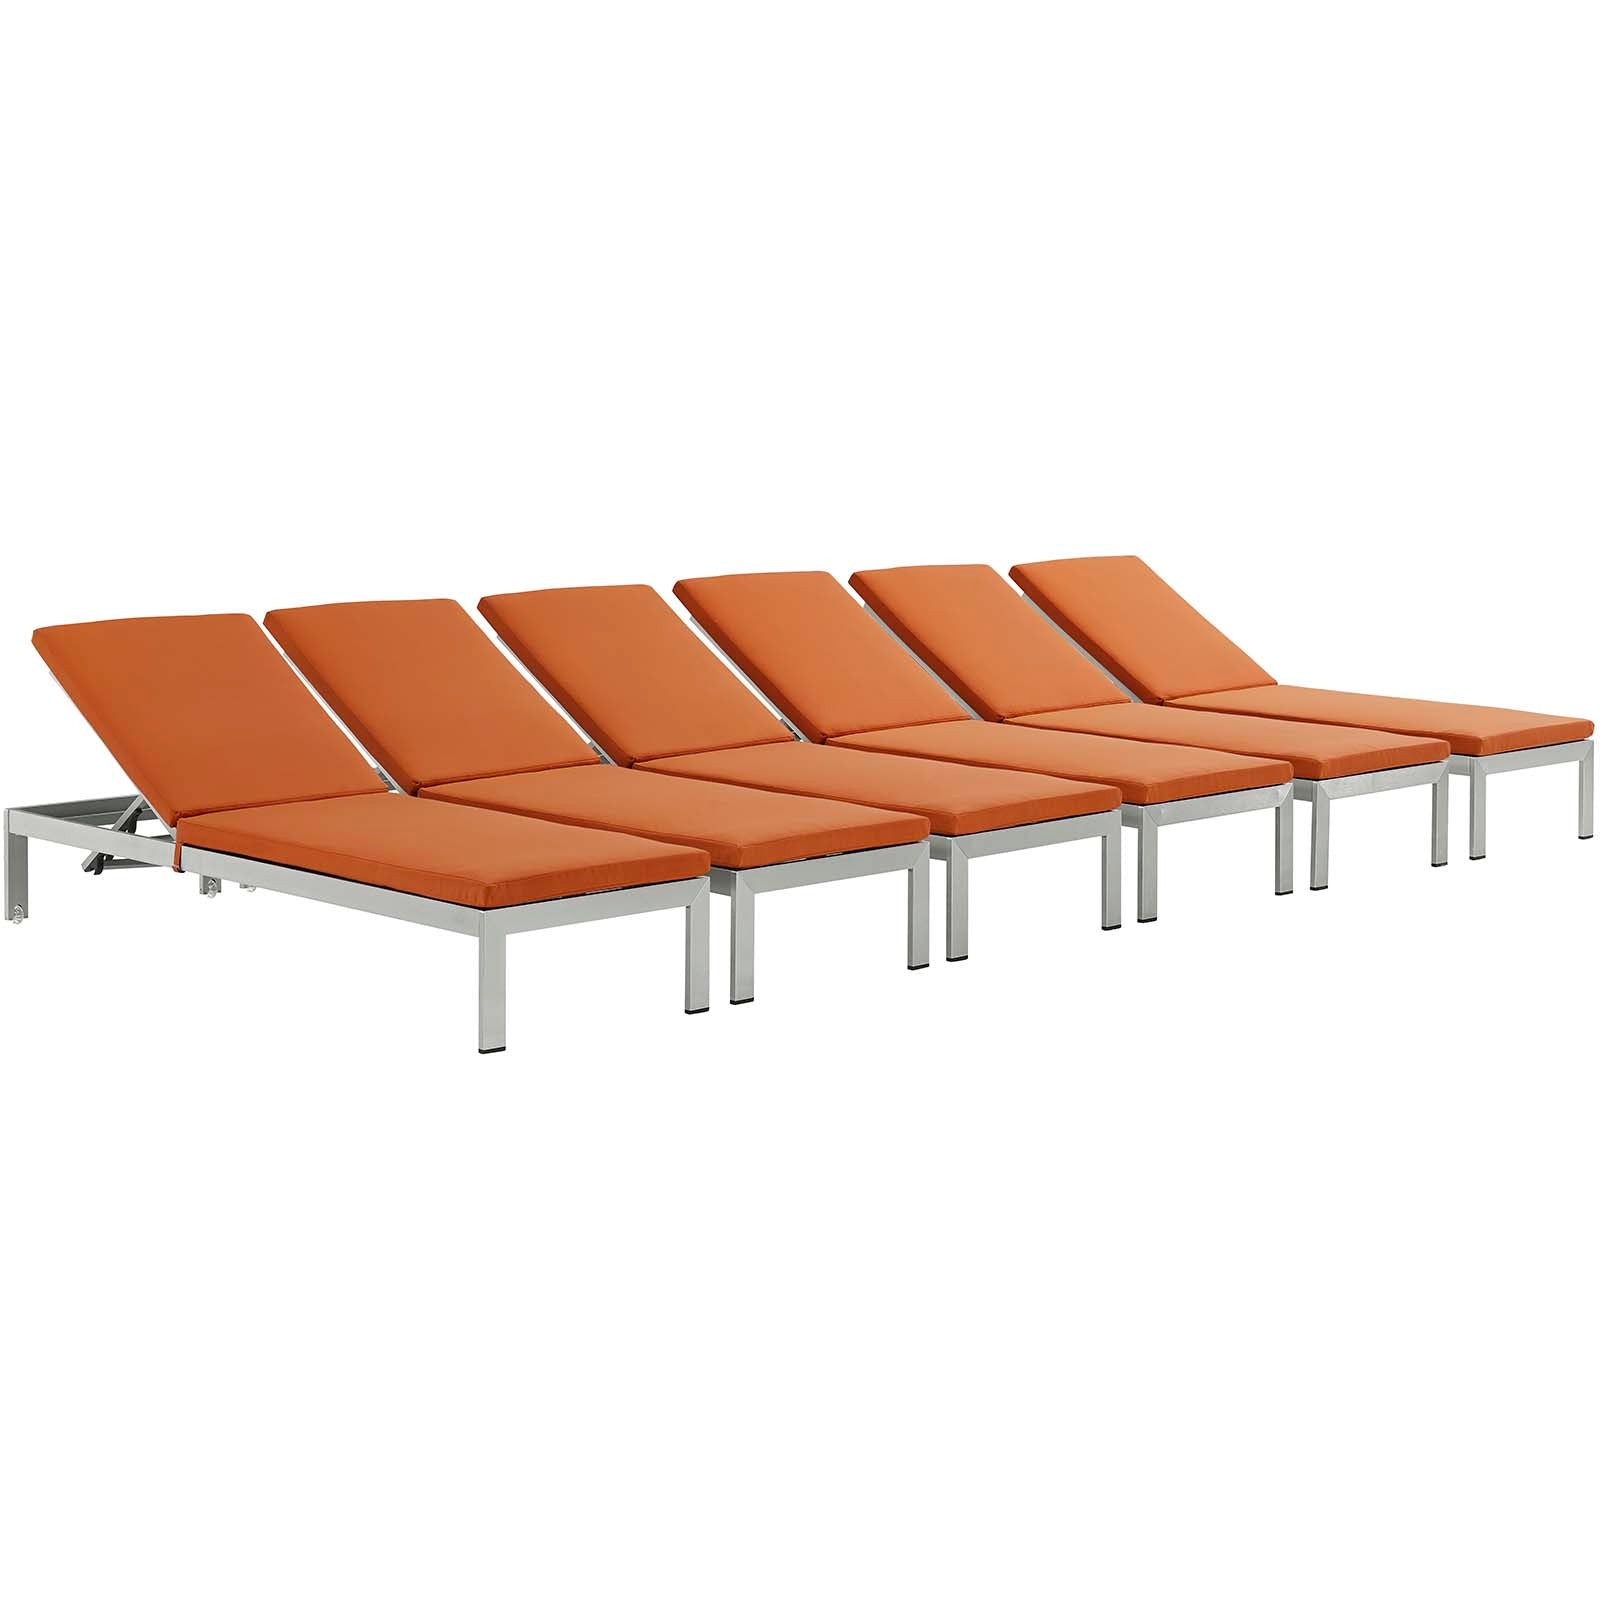 Modway Outdoor Loungers - Shore Chaise with Cushions Outdoor Patio Aluminum Set of 6 Silver Orange